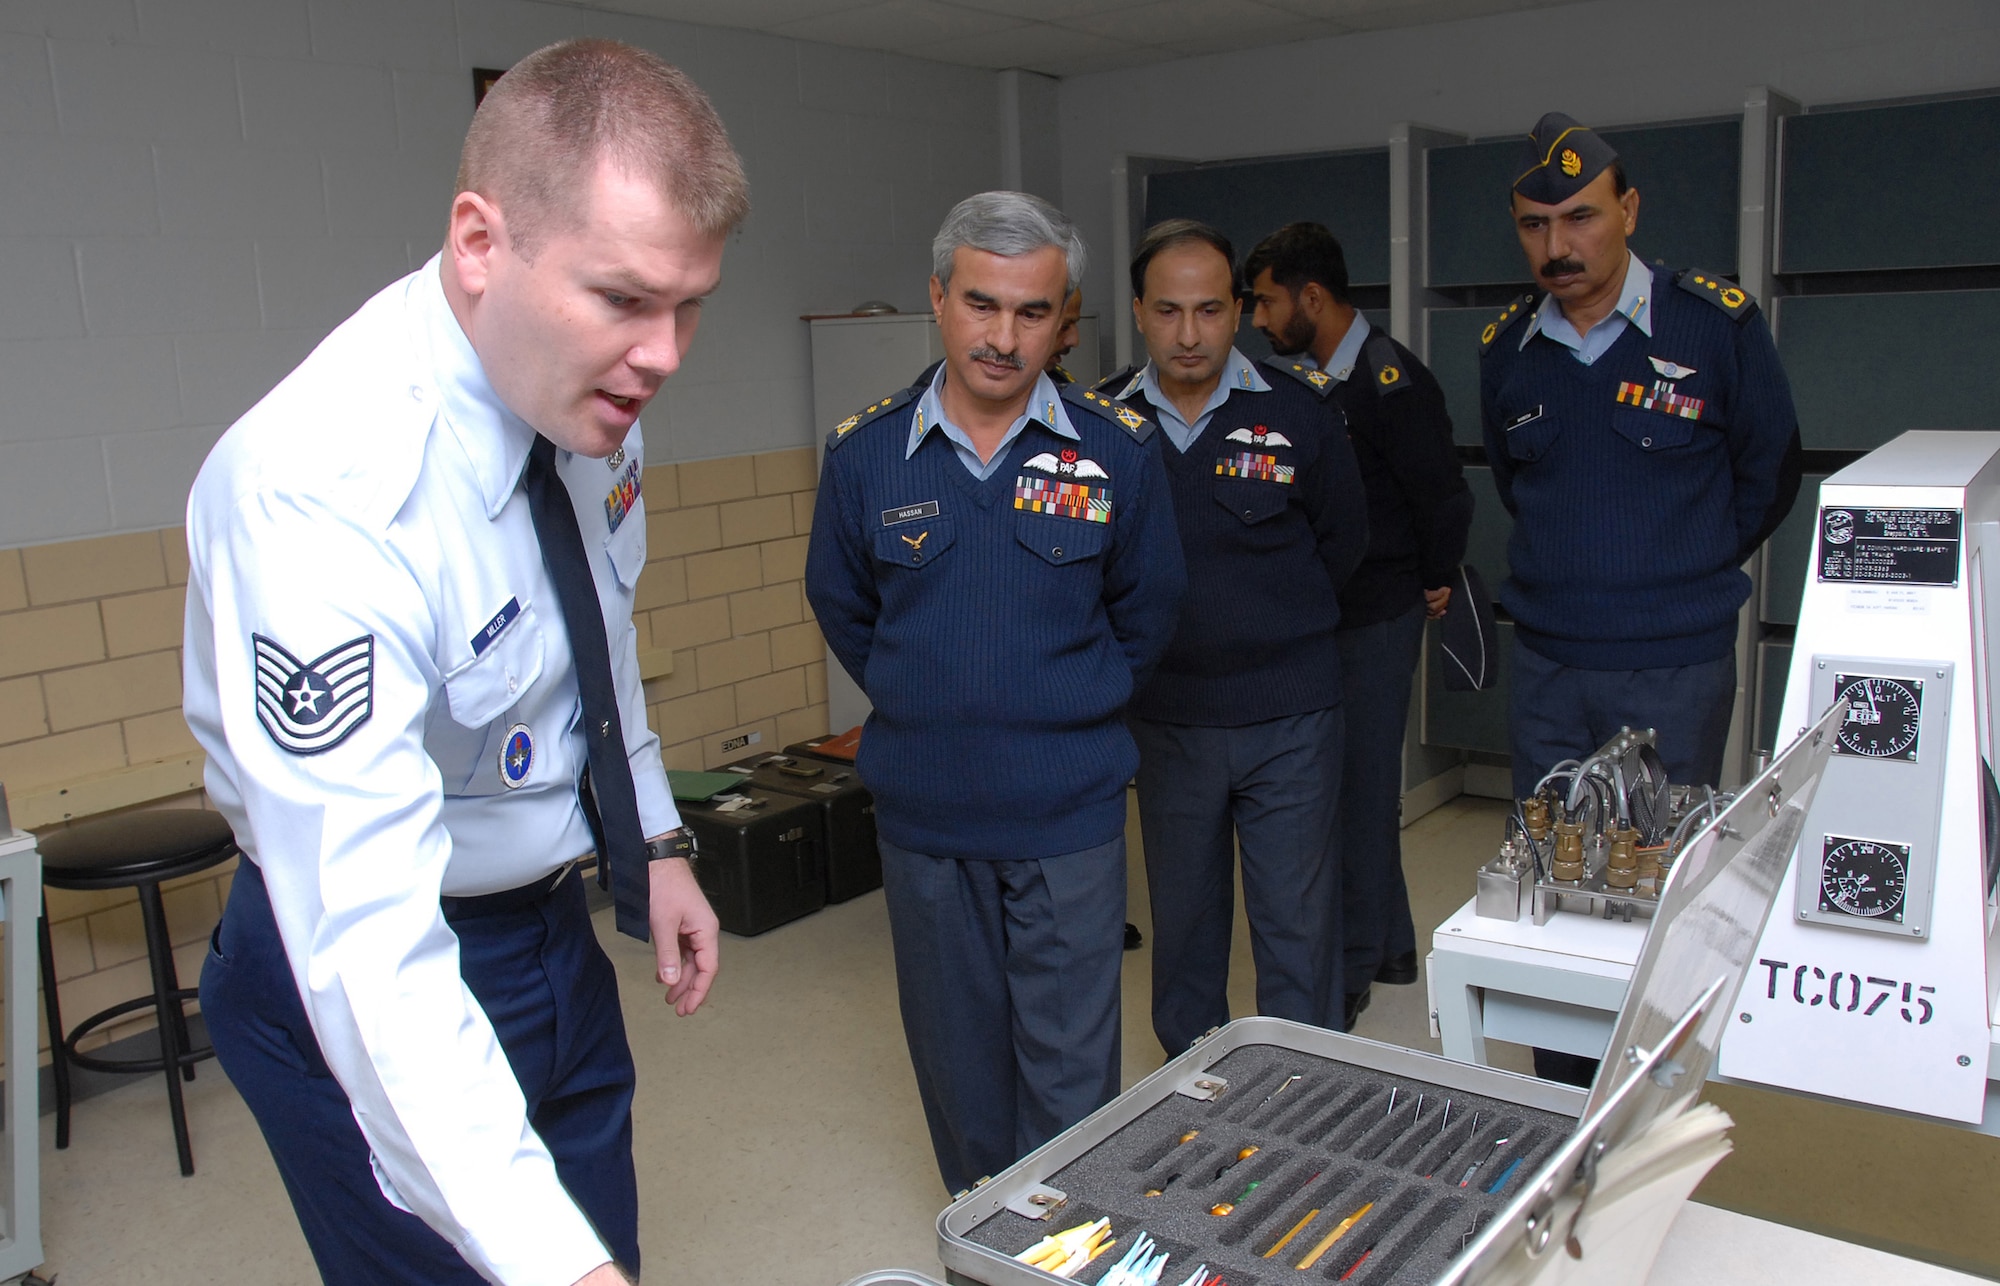 Members of the Pakistan Air Force listen as Tech. Sgt. Eric Miller of the 365th Training Squadron explains how instructors teach Airmen to use the Daniels Kit, a tool used to repair complex wiring systems on F-16s. Also pictured are, from left to right, Air Vice Marshall Muhammad Hassan, Air Commodore Khalid Chishti, Squadron Leader Muhammad Iftikhar and Col. Waseem Medhi. (U.S. Air Force photo/Mike Litteken)